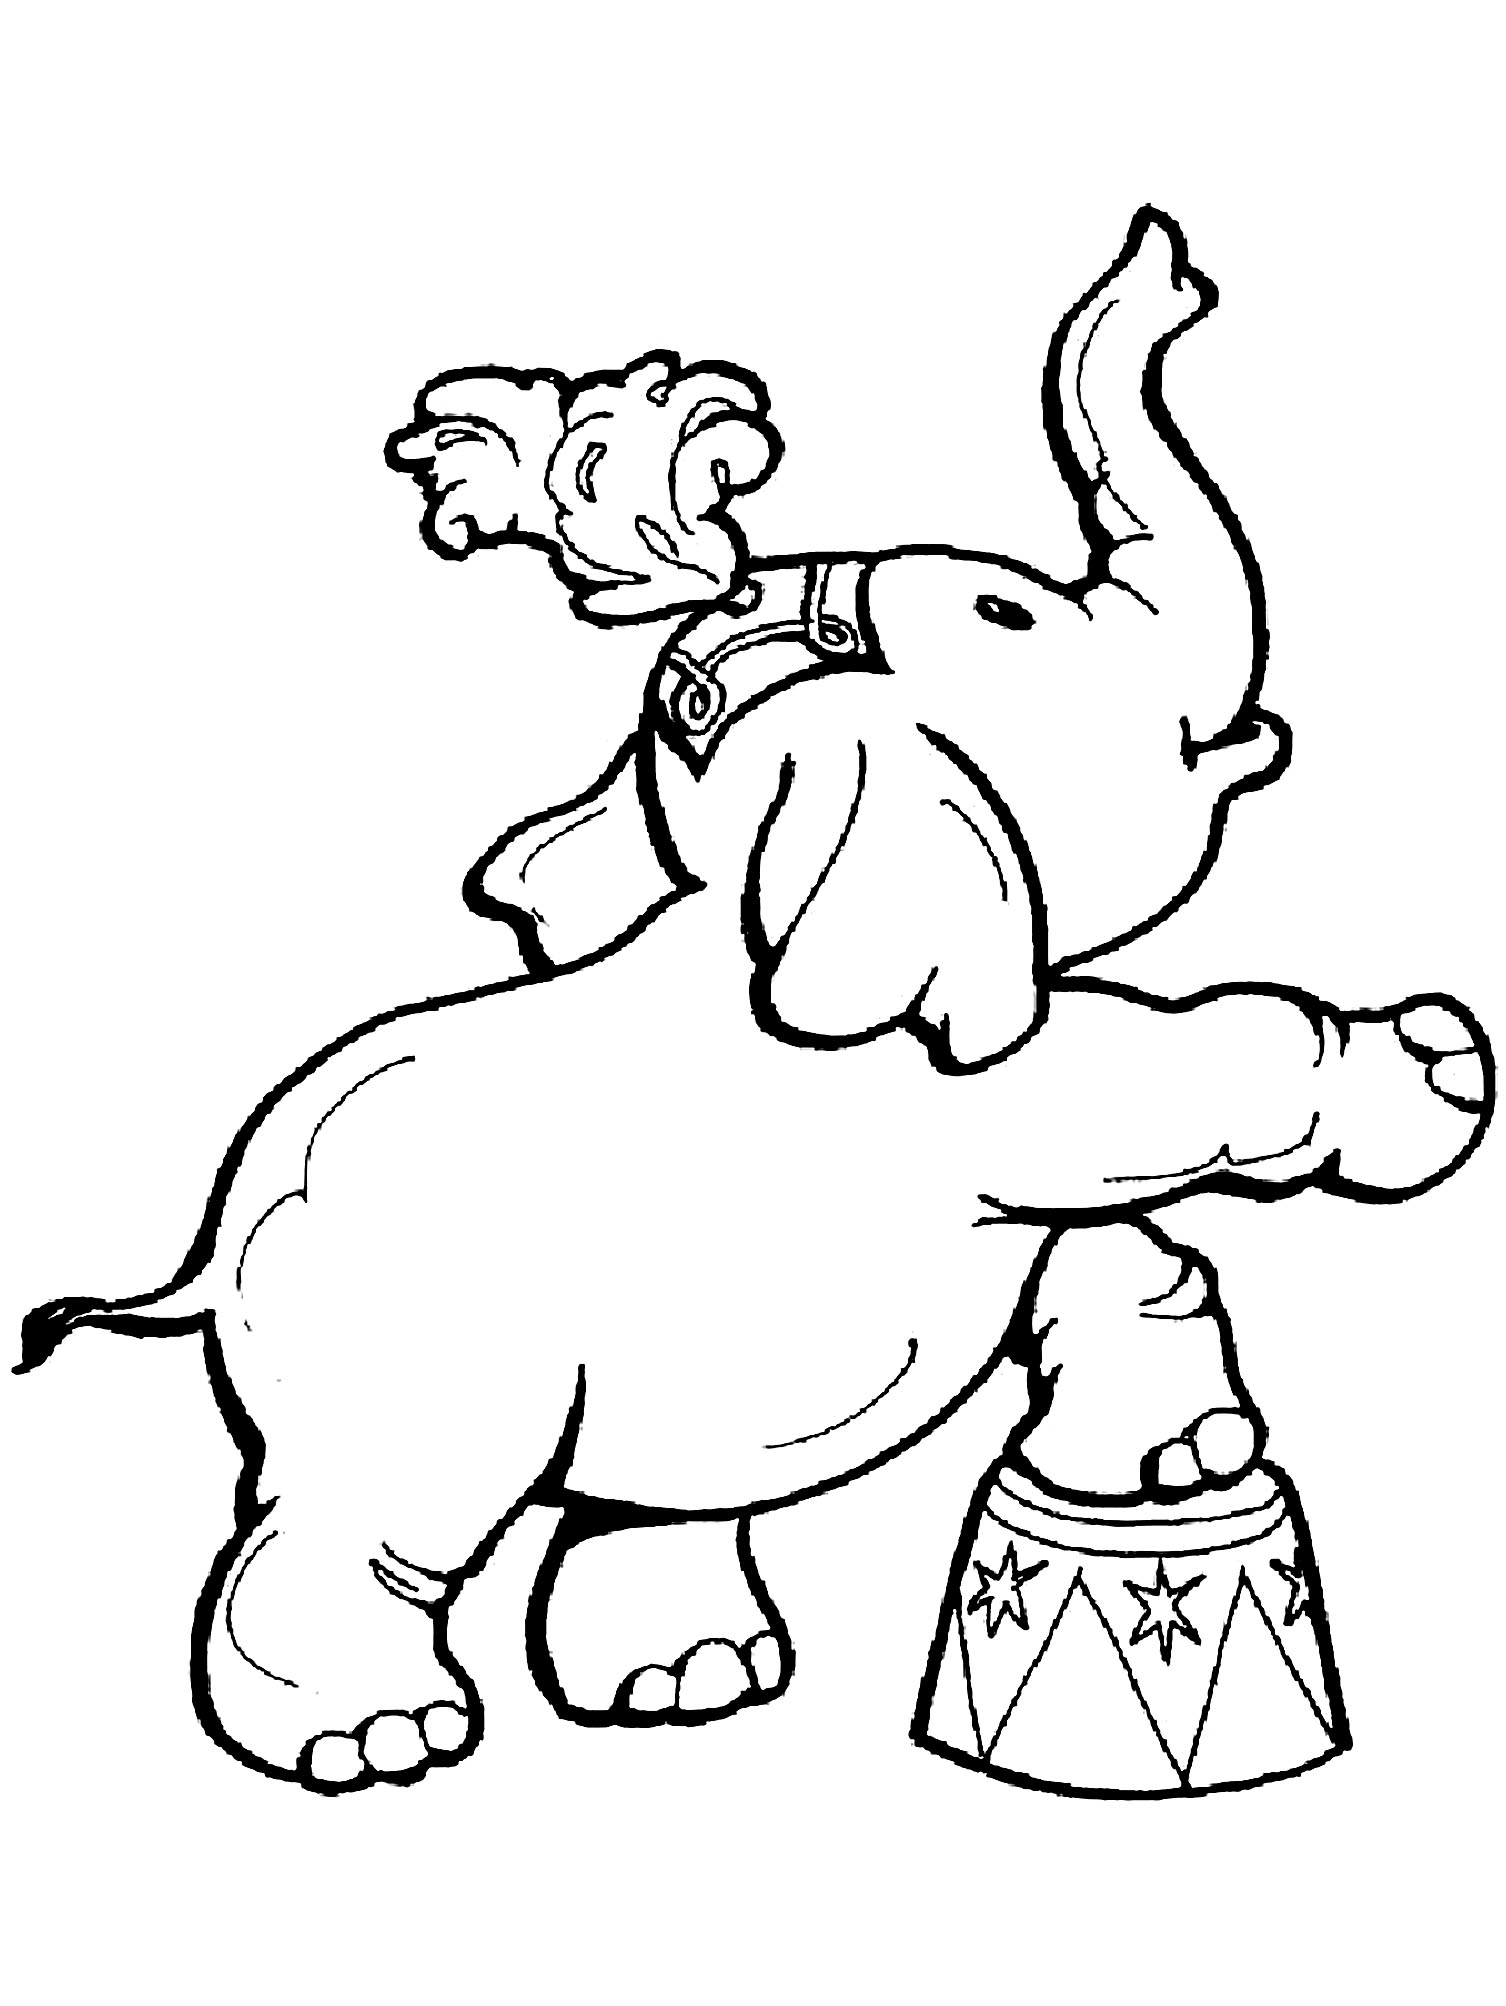 free-circus-coloring-pages-to-color-circus-kids-coloring-pages